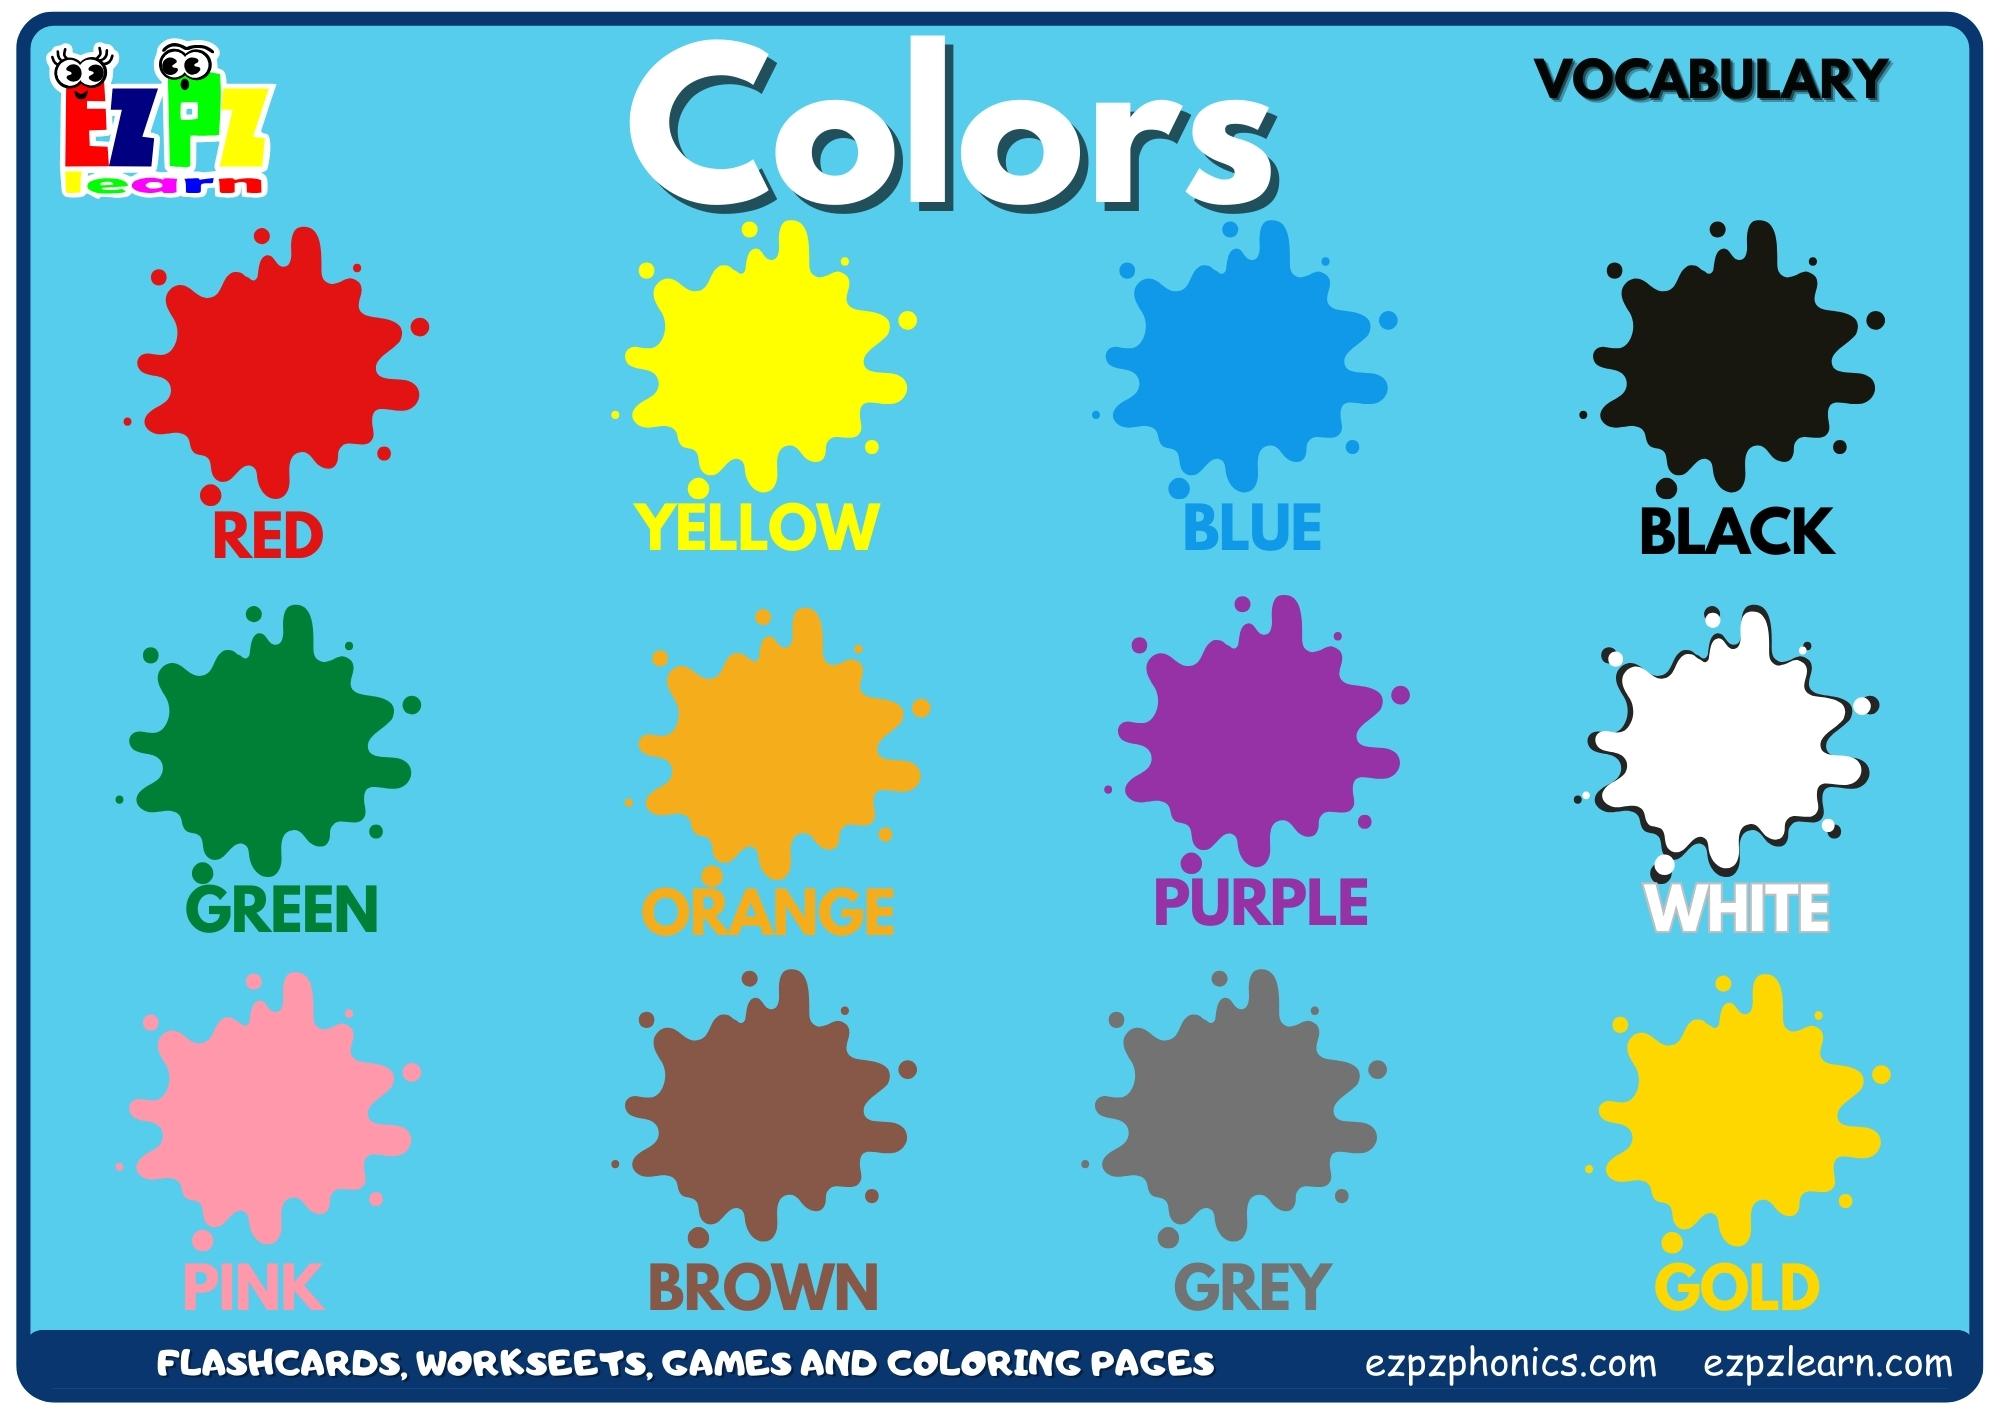 Colors Vocabulary Picture Dictionary Join Now for Free Flashcards ...